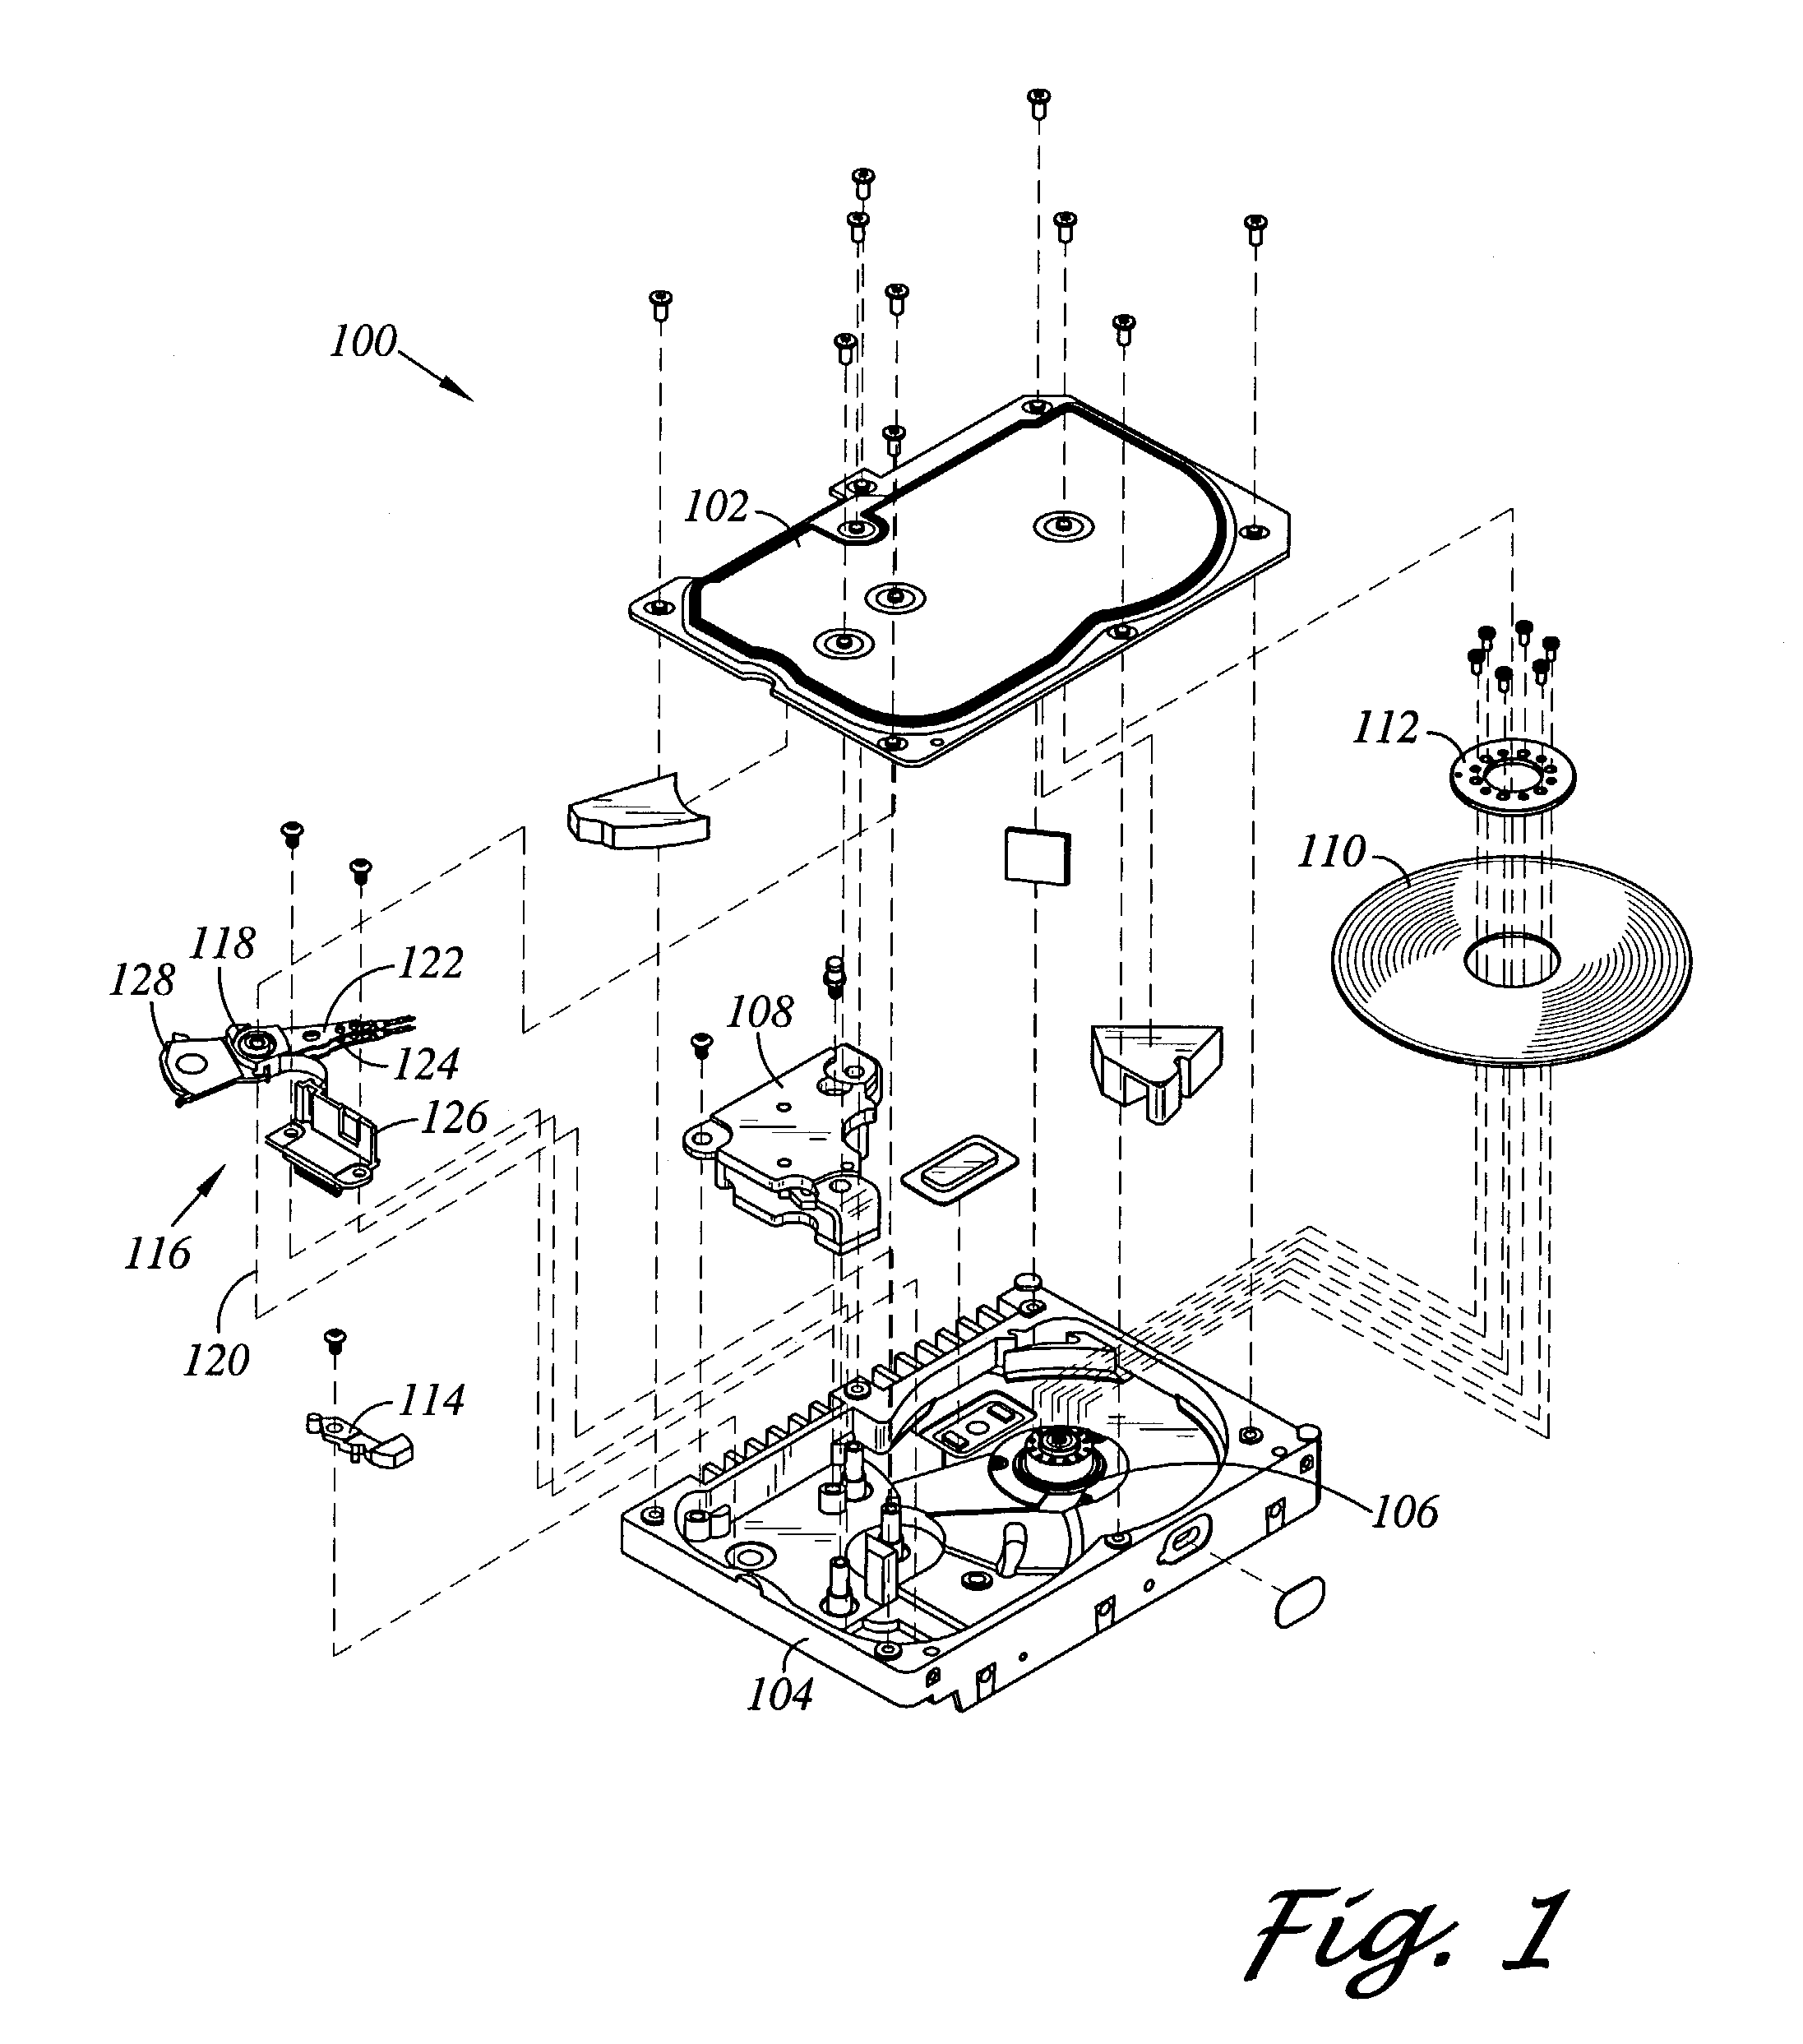 Disk drive rotary actuator assembly having a constrained layer damper attached to a flat actuator coil